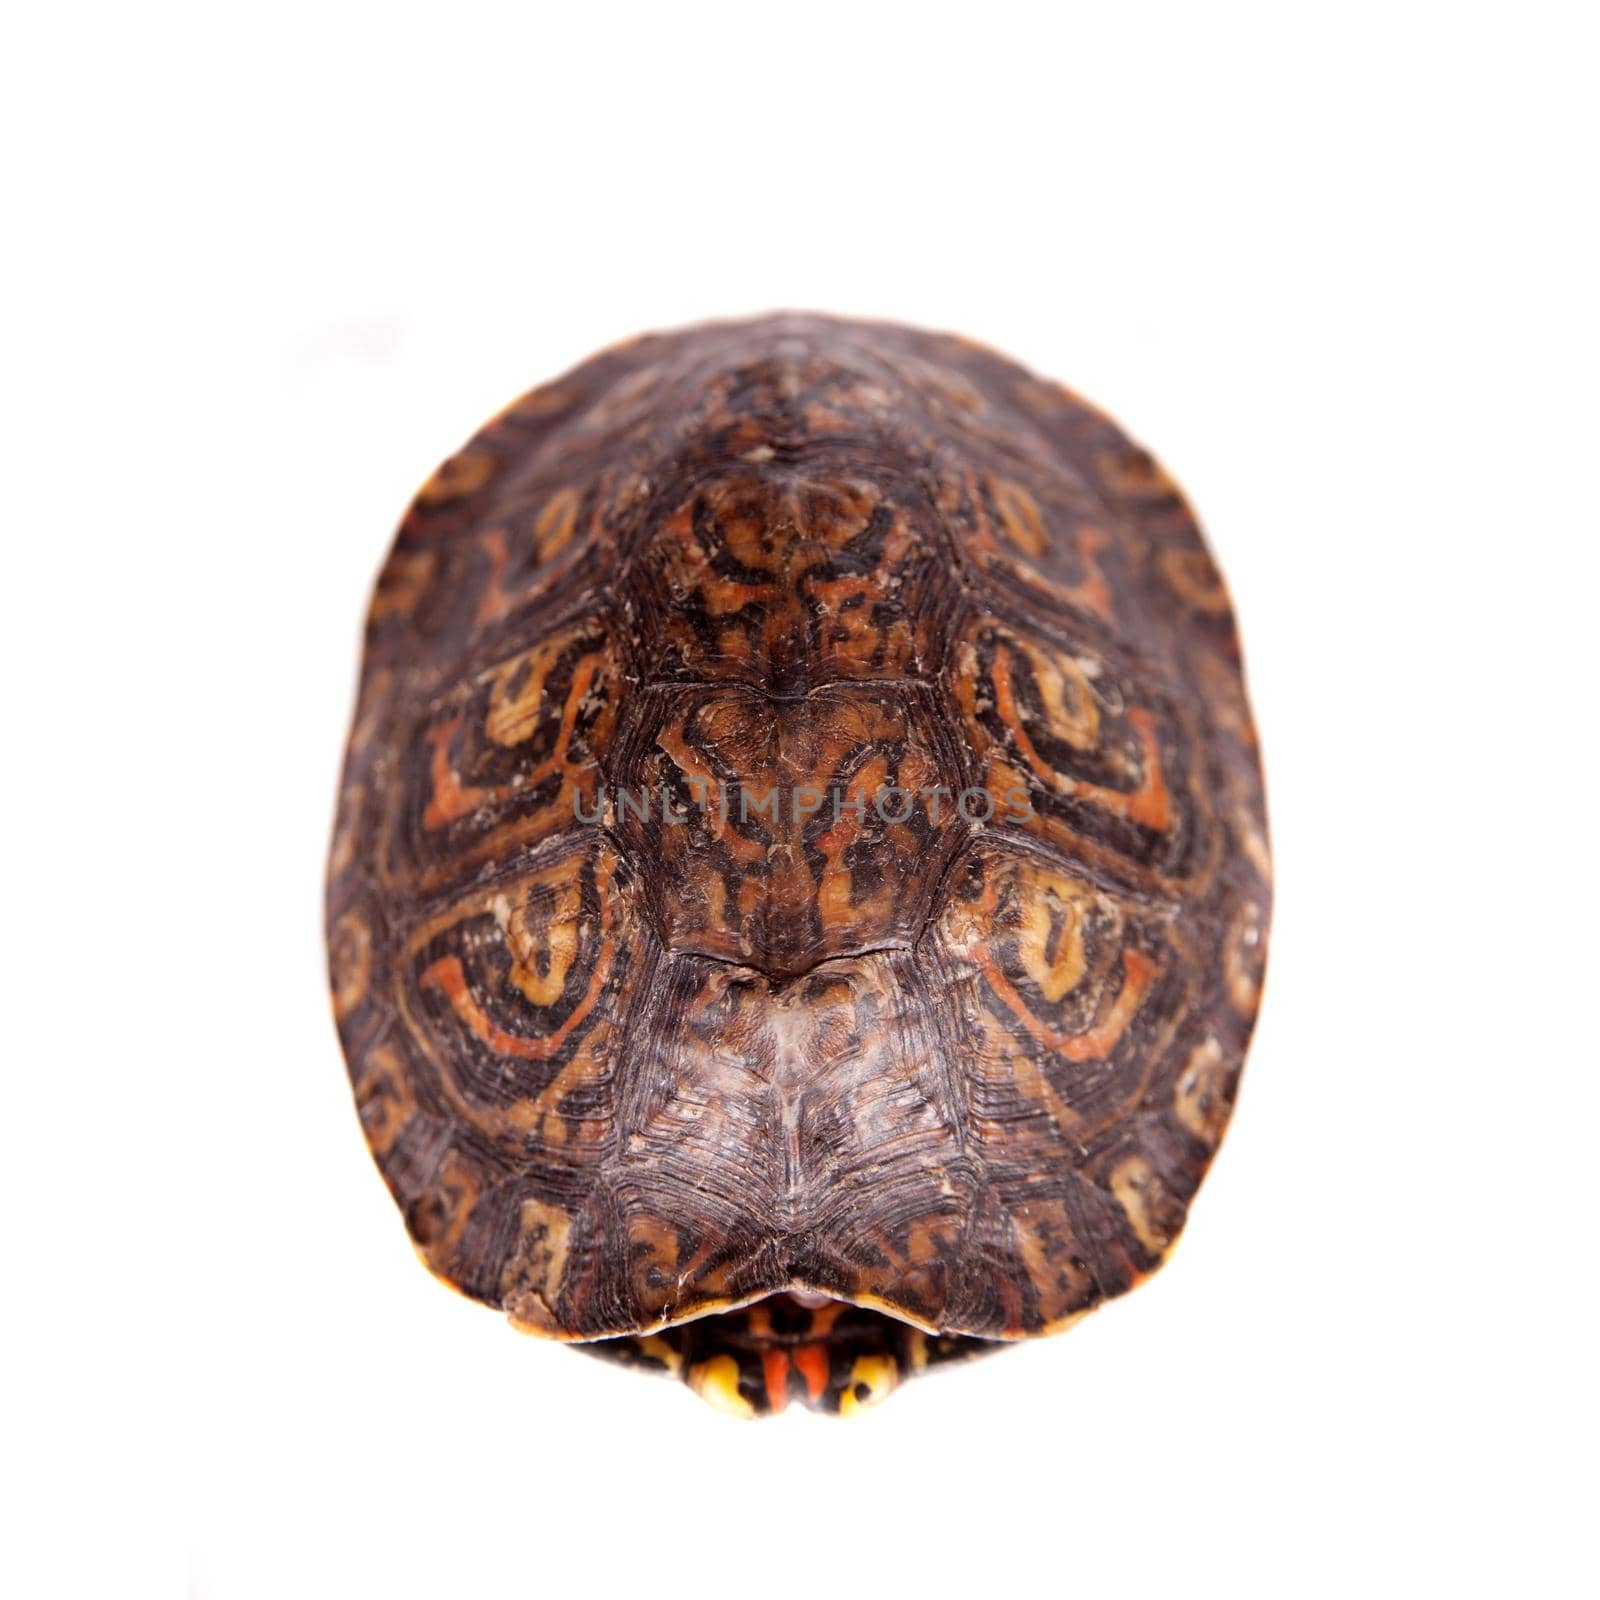 The Painted wood turtle on white by RosaJay